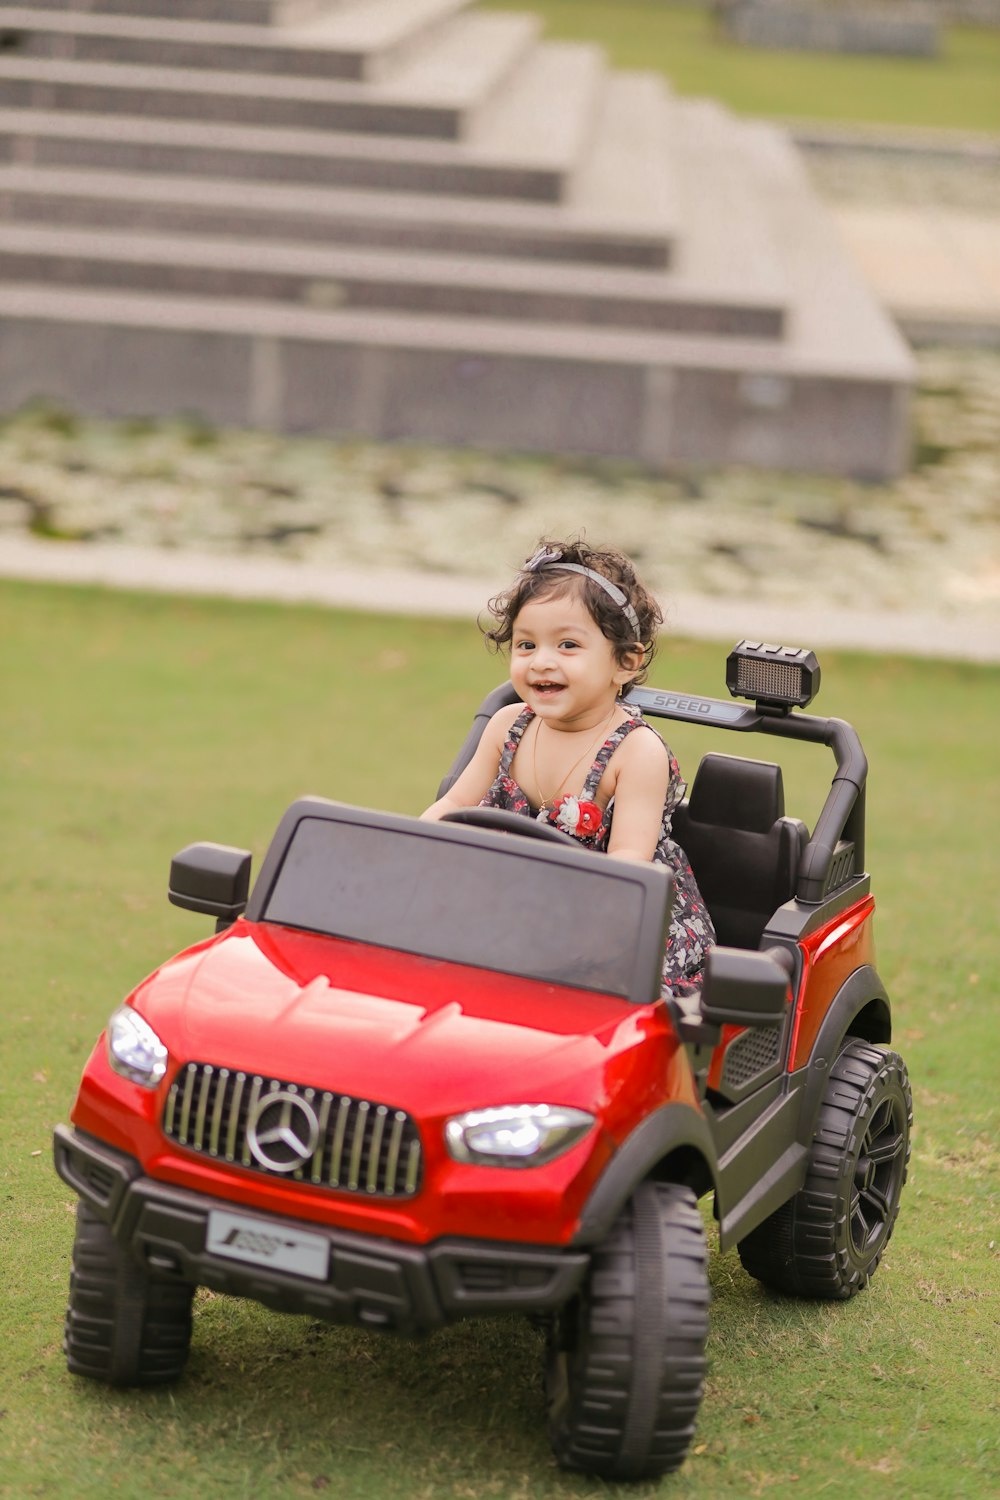 a little girl riding a red toy car